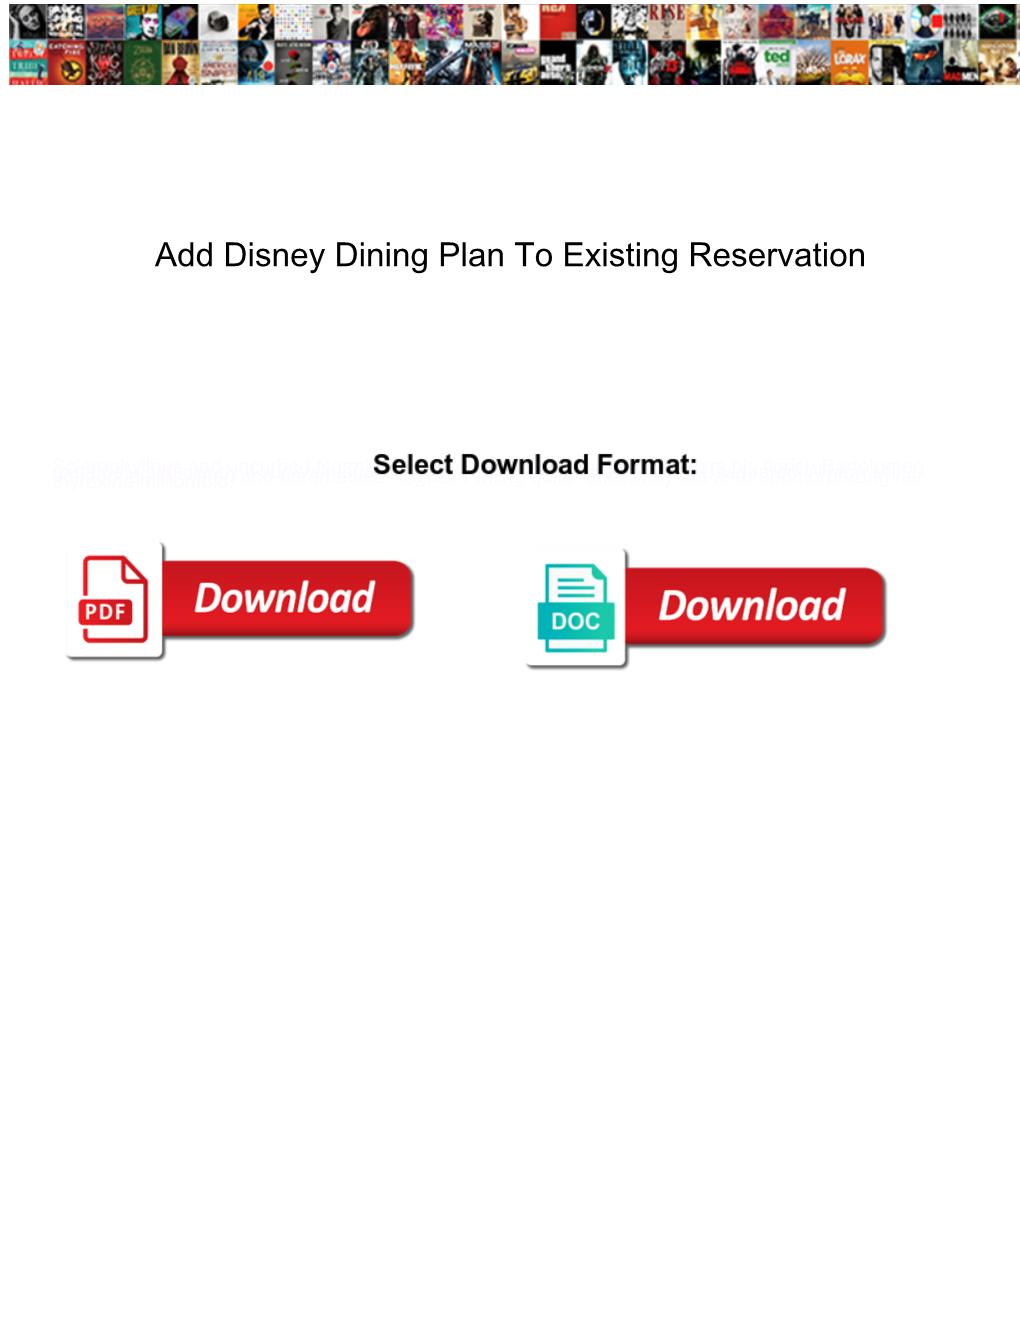 Add Disney Dining Plan to Existing Reservation